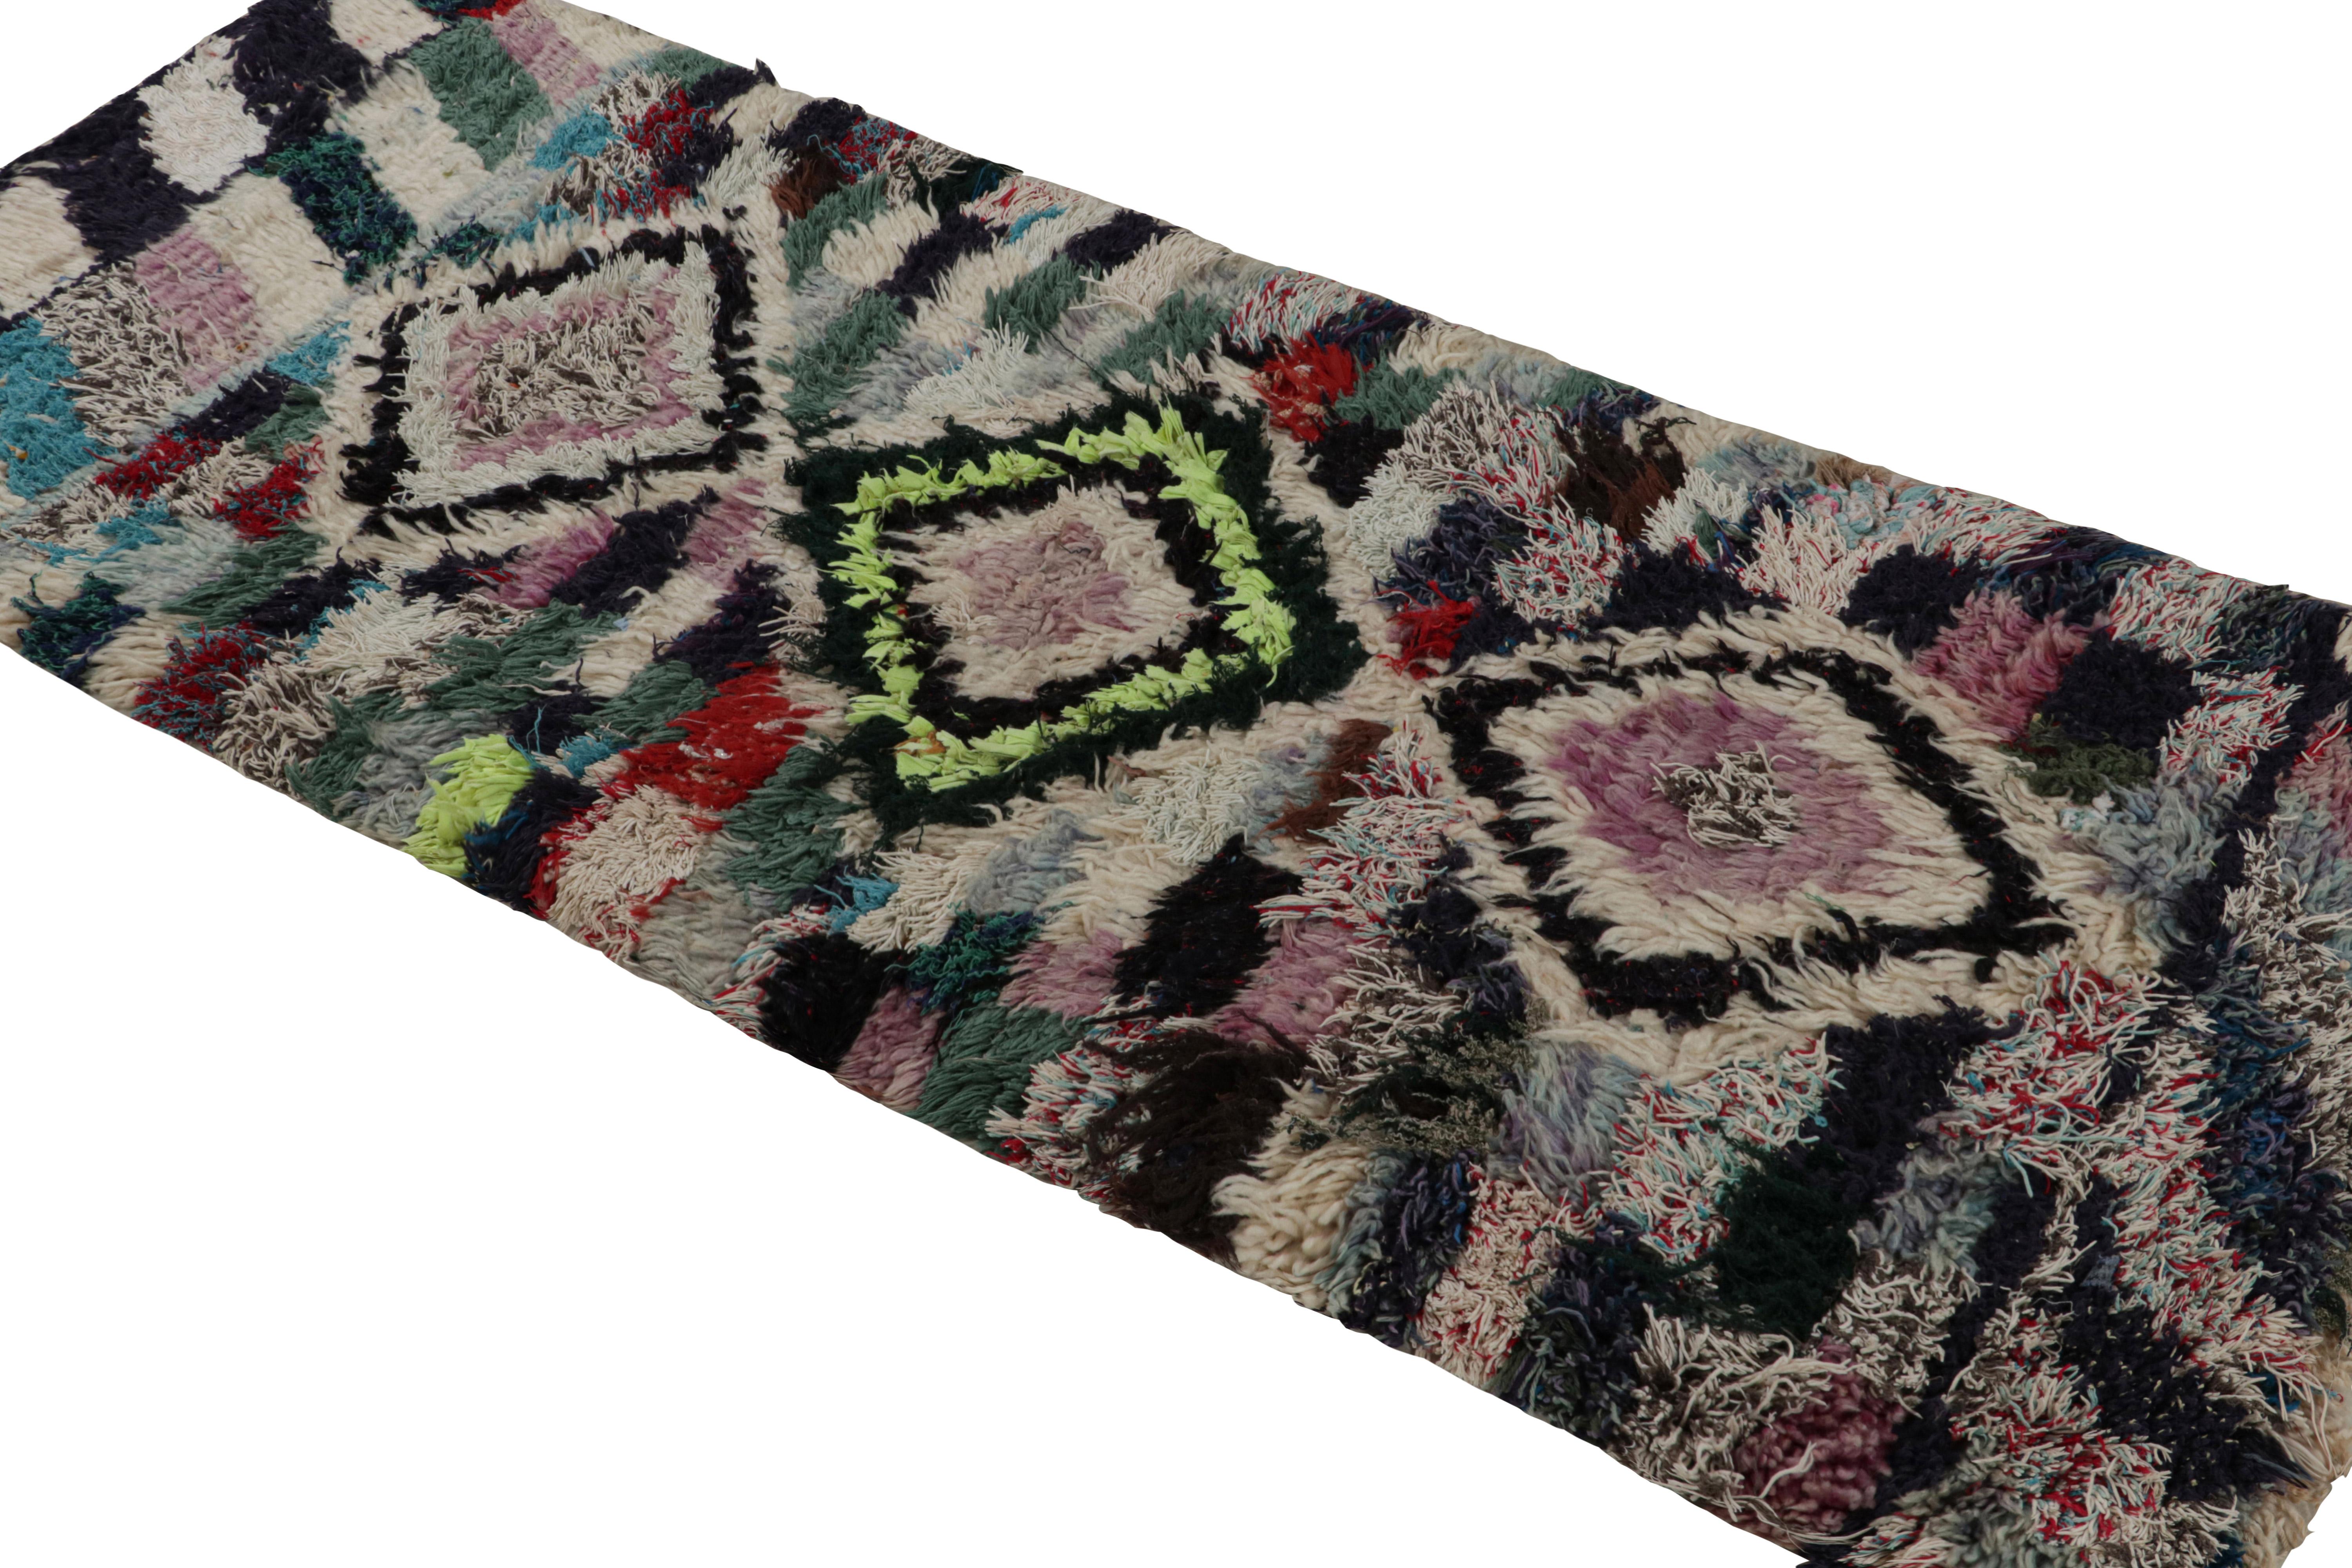 Hand-knotted in wool circa 1950-1960, this vintage 3x7 Moroccan runner is believed to hail from the Azilal tribe. 

On the Design: 

Keen eyes will particularly note a colorful play of diamond lozenges and geometric patterns in a polychromatic style